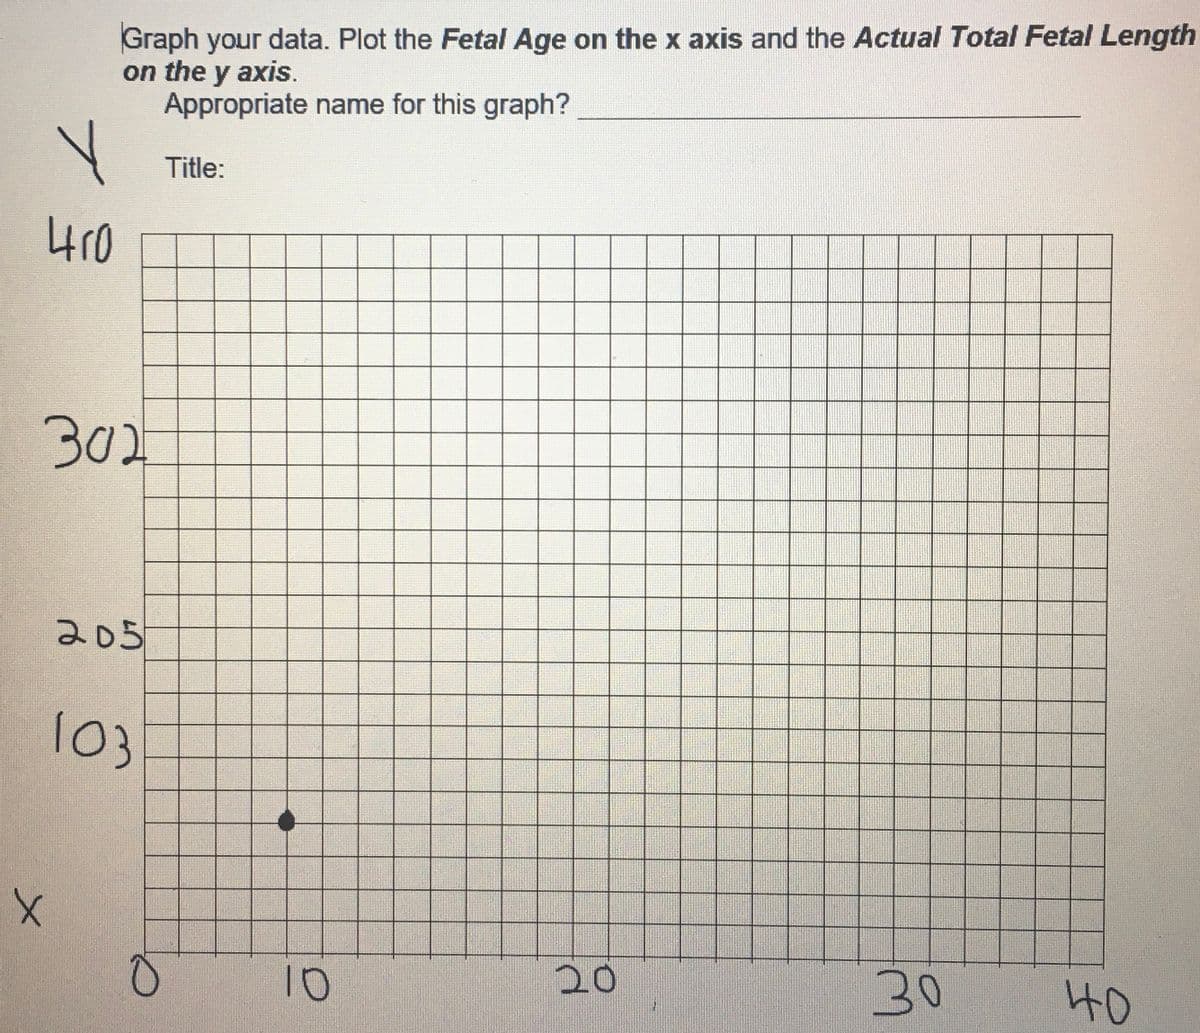 410
Graph your data. Plot the Fetal Age on the x axis and the Actual Total Fetal Length
on the y axis.
Appropriate name for this graph?
Title:
302
205
103
0
10
20
30
40